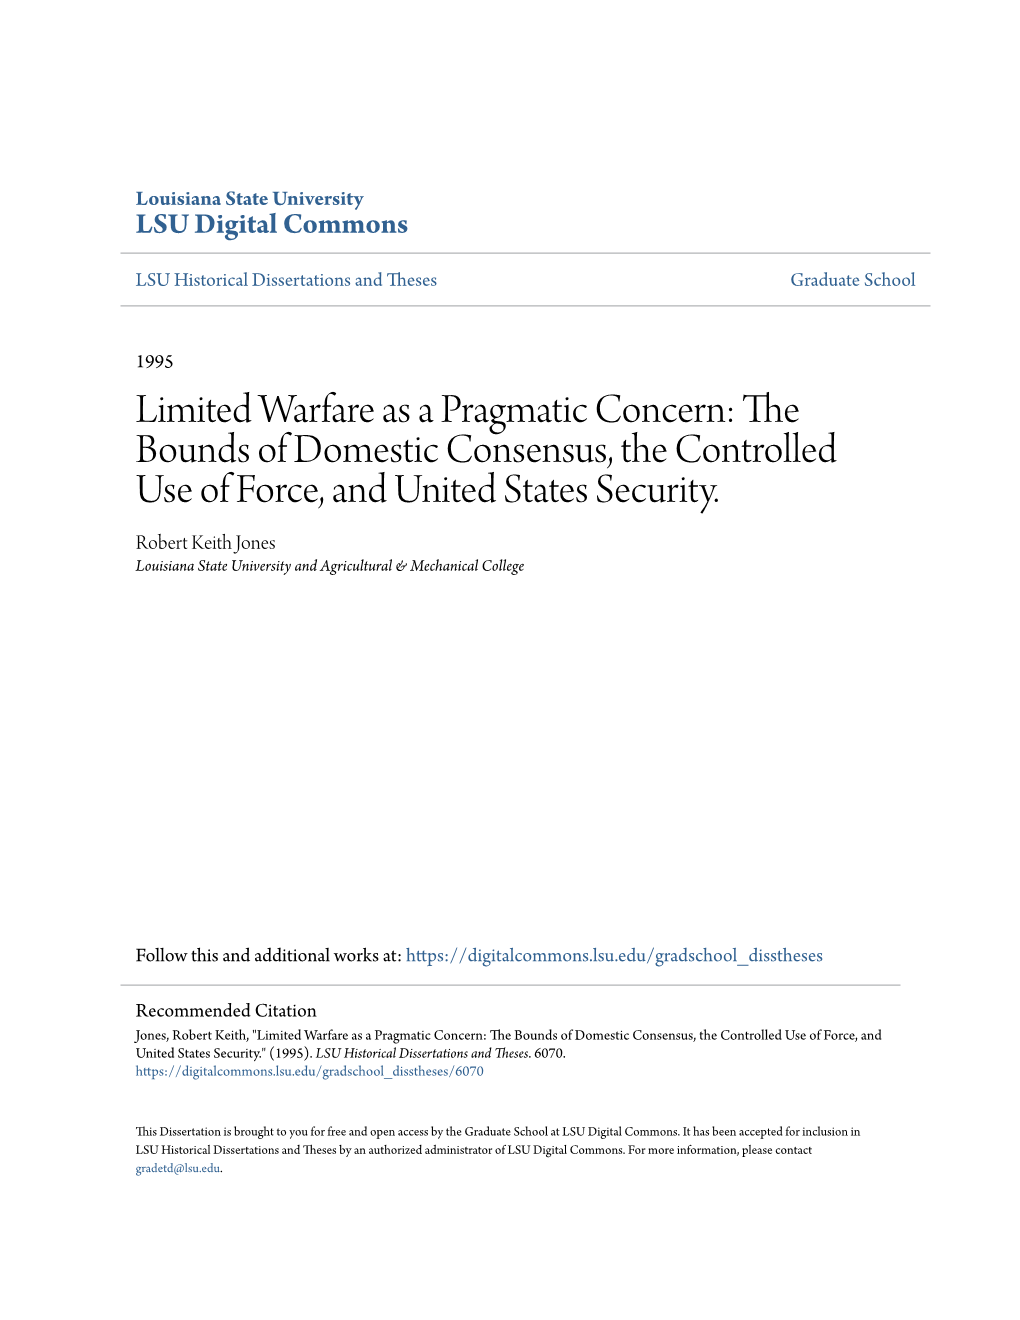 Limited Warfare As a Pragmatic Concern: the Bounds of Domestic Consensus, the Controlled Use of Force, and United States Security